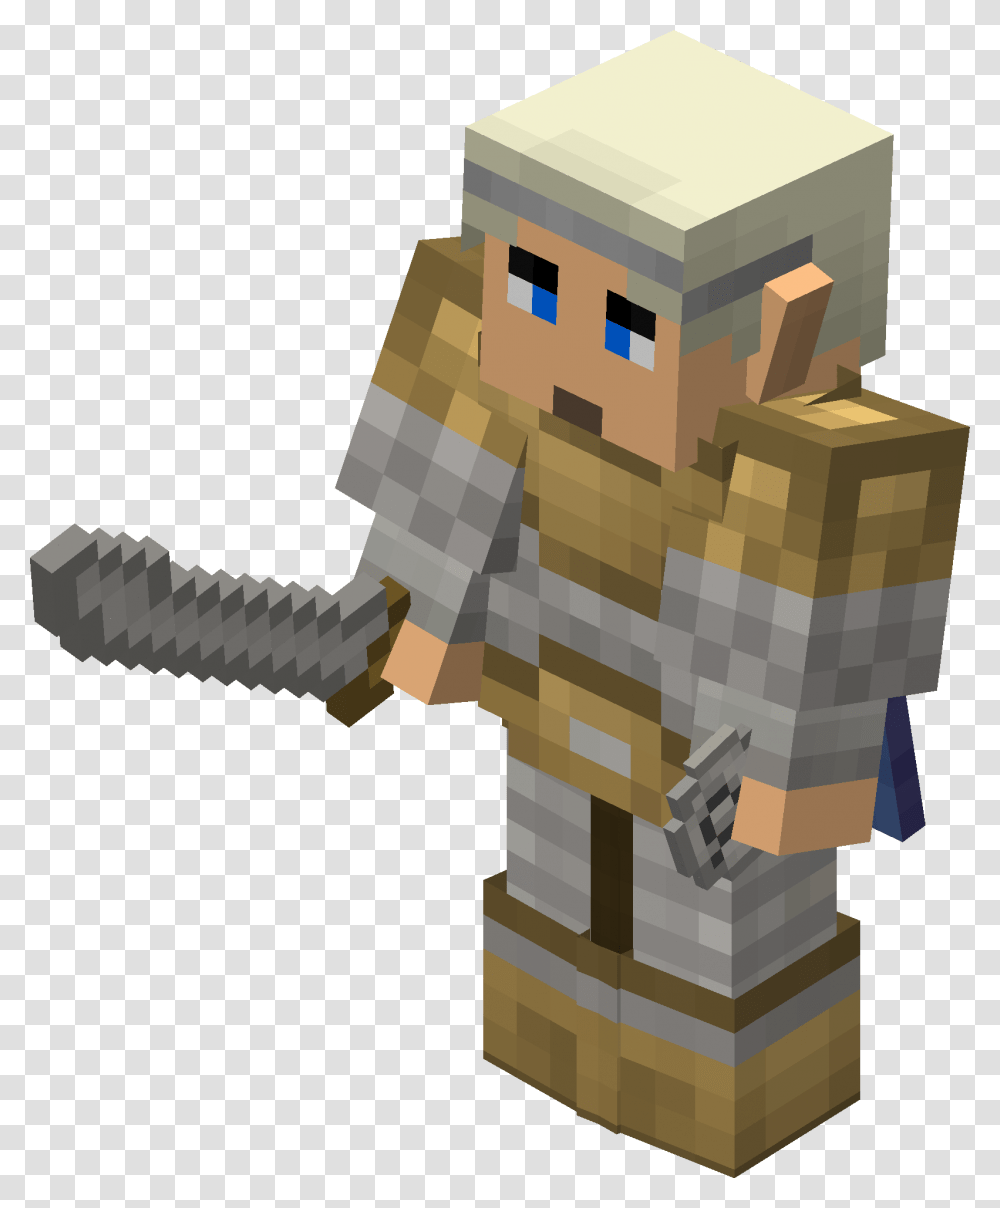 The Lord Of The Rings Minecraft Mod Wiki Lord Of The Rings Dark Elf Minecraft, Toy Transparent Png